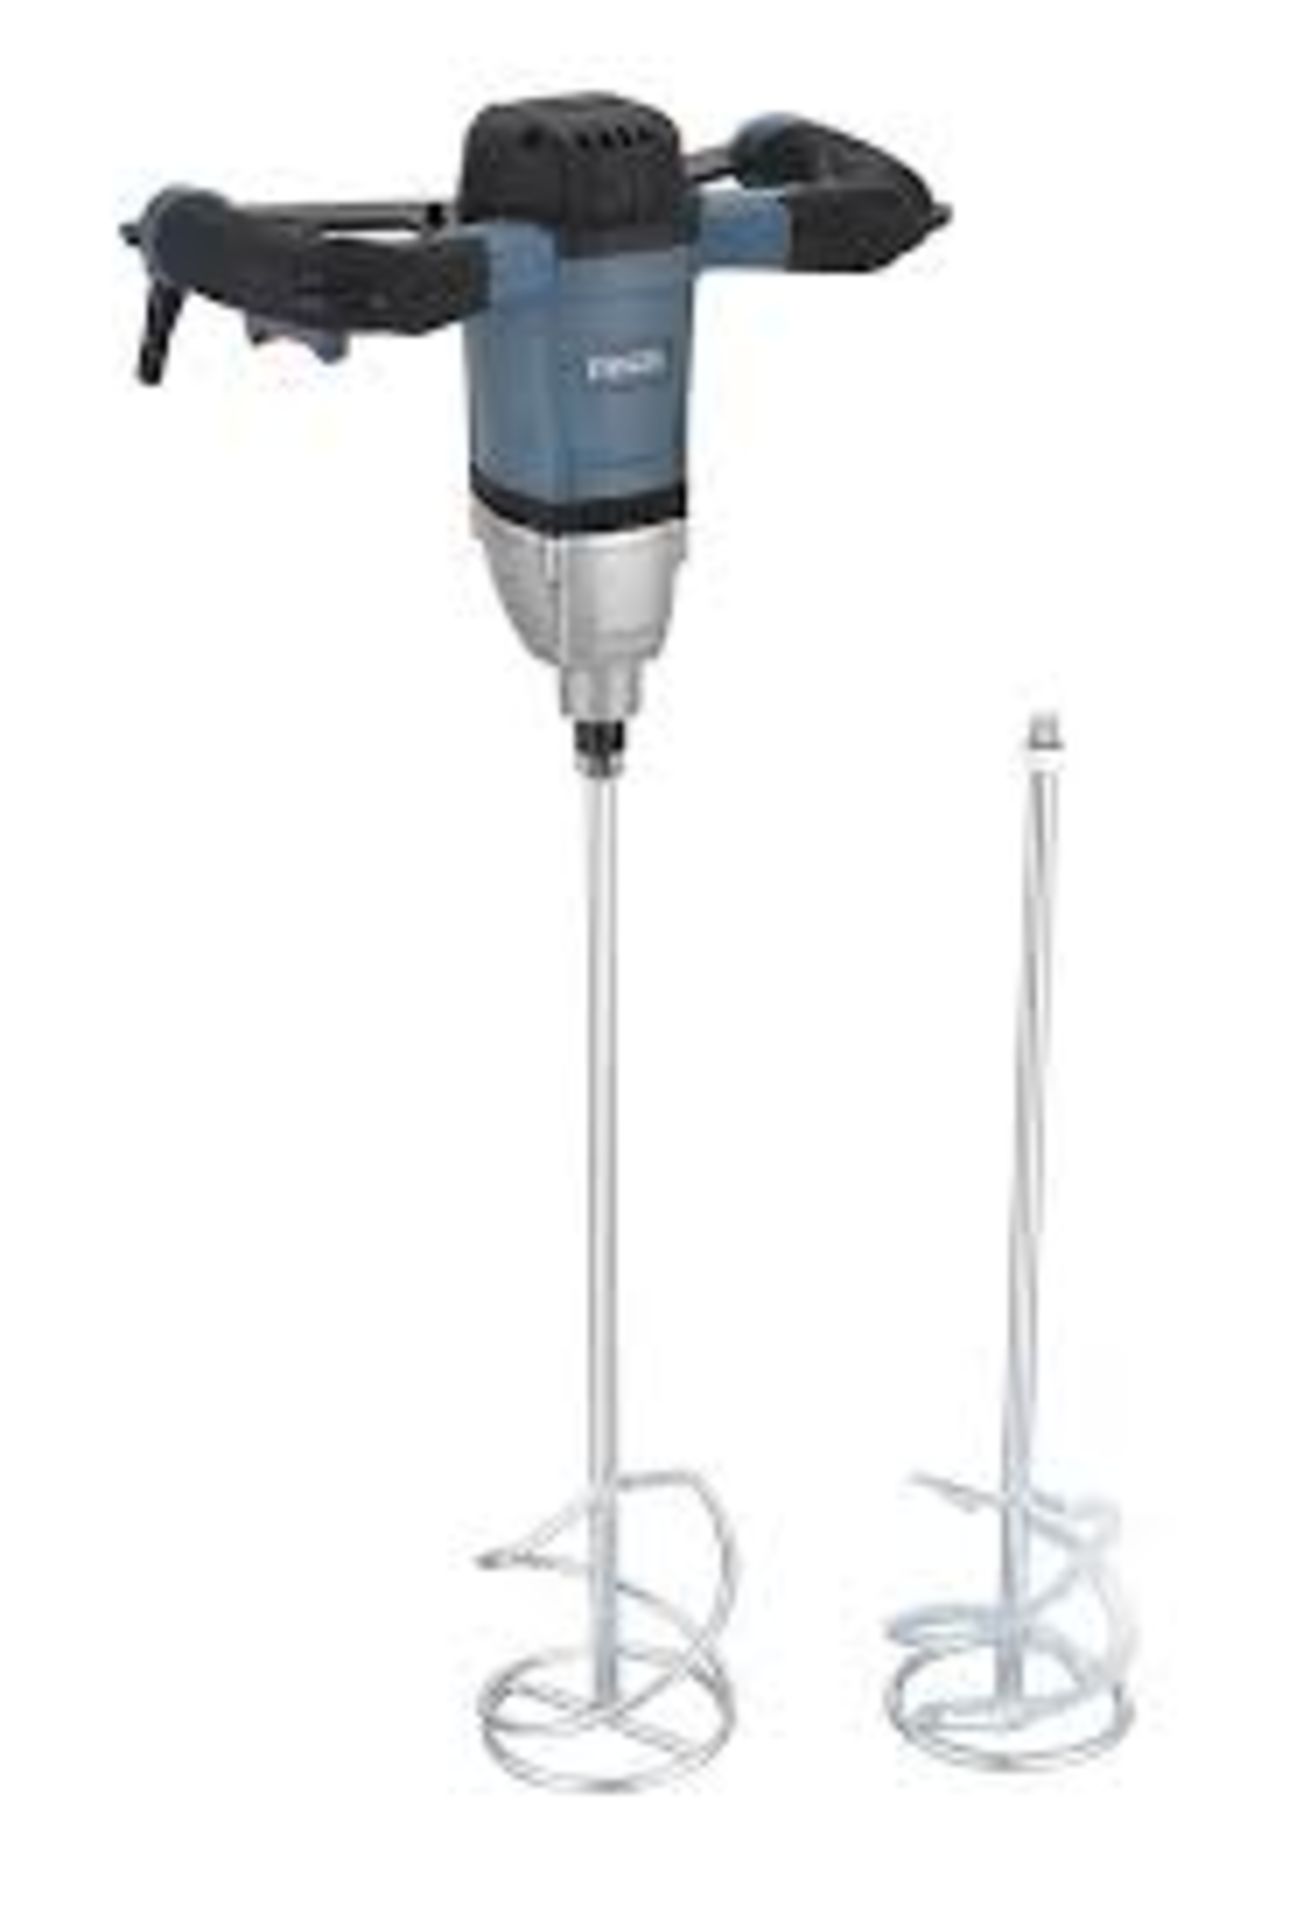 Erbauer 1600W 240V Corded Paddle mixer EPM1600. - PW. Powerful and durable paddle mixer with